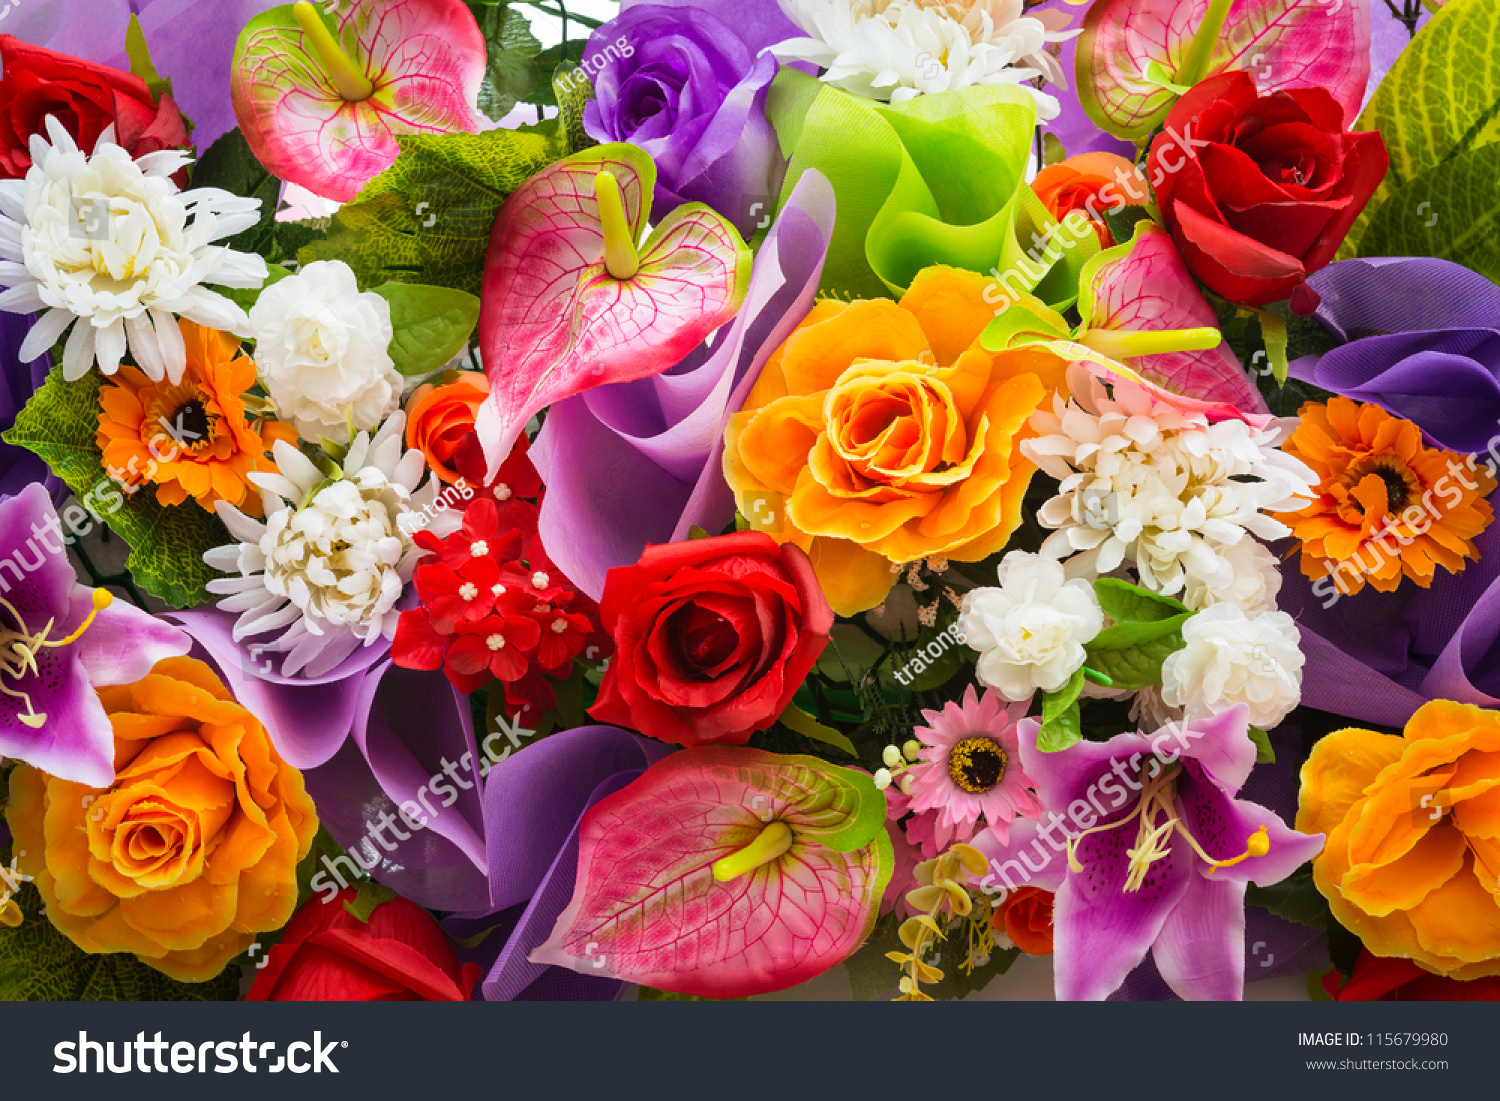 stock photo bunch of flowers 115679980